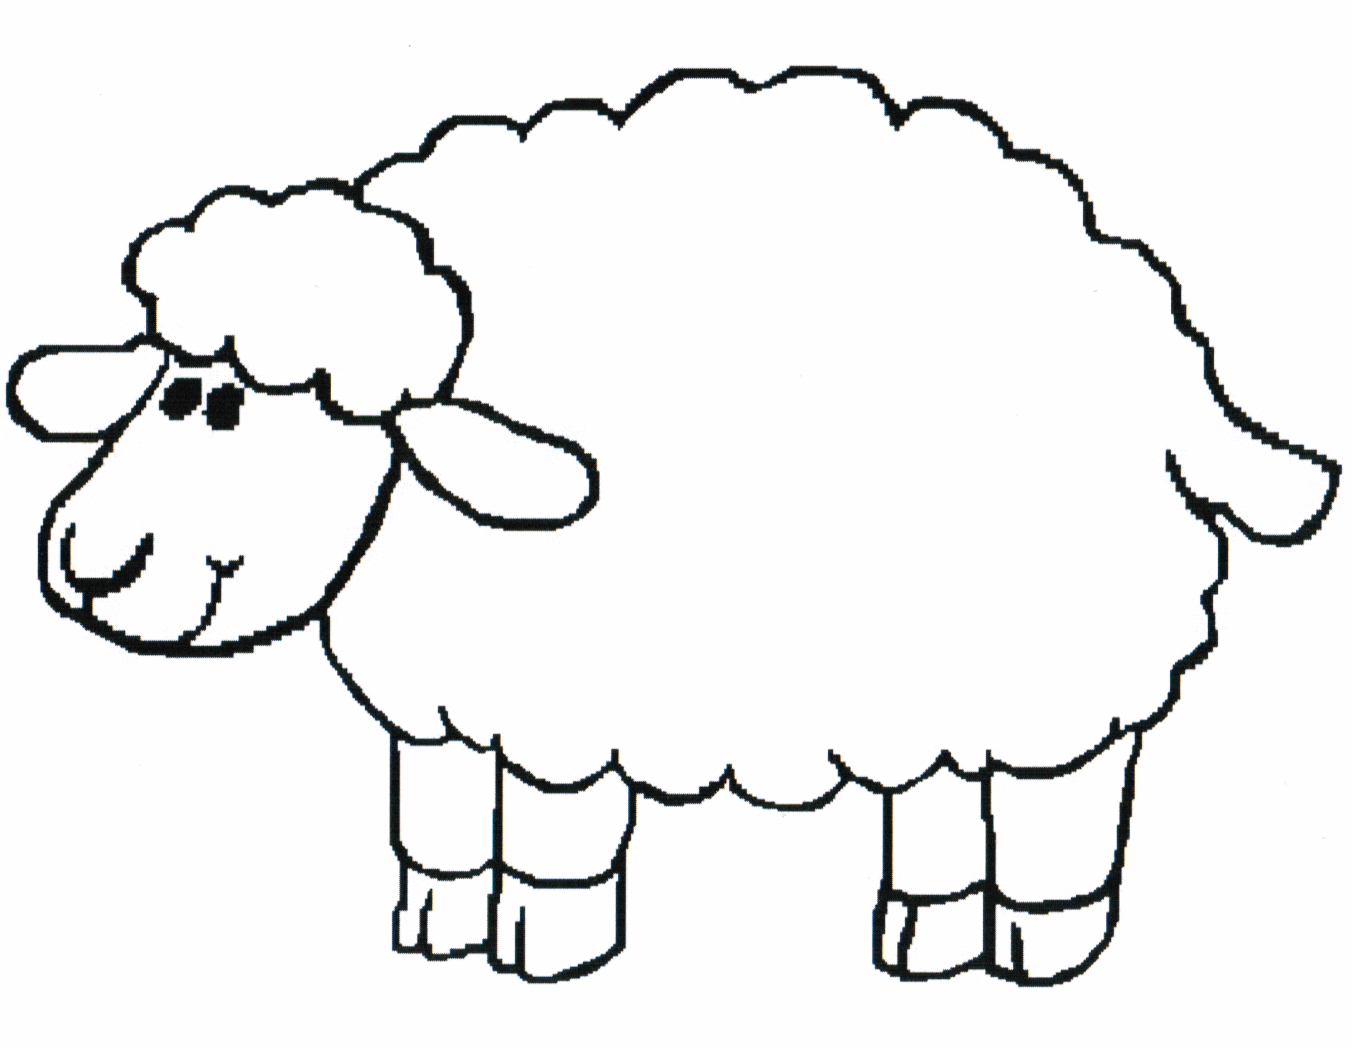 Sheep  black and white sheep clipart black and white cute clipartfest